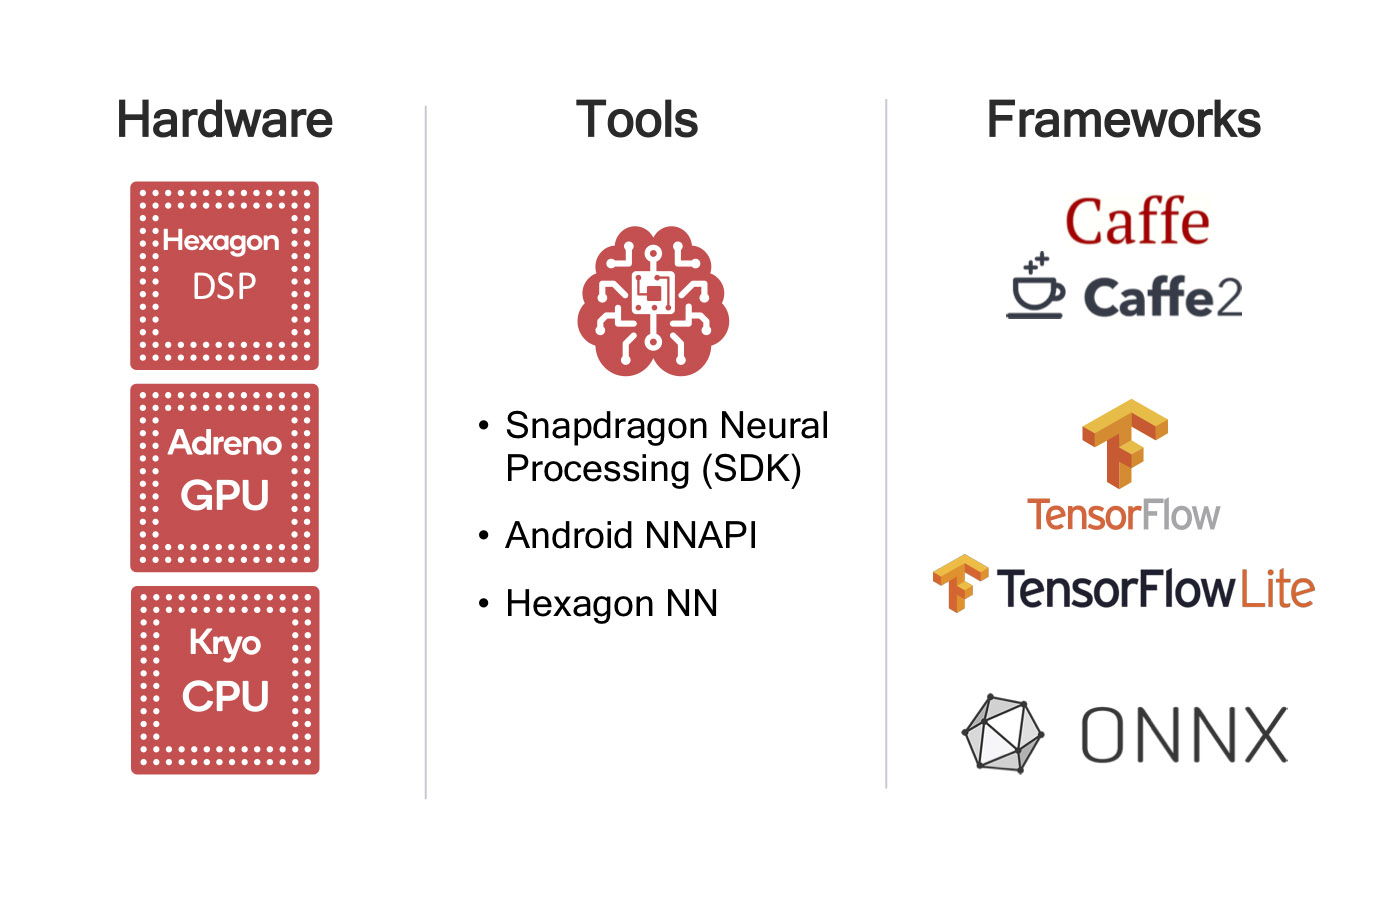 An overview of how AI features can be implemented with Qualcomm Snapdragon processors and the Snapdragon Neural Processing SDK